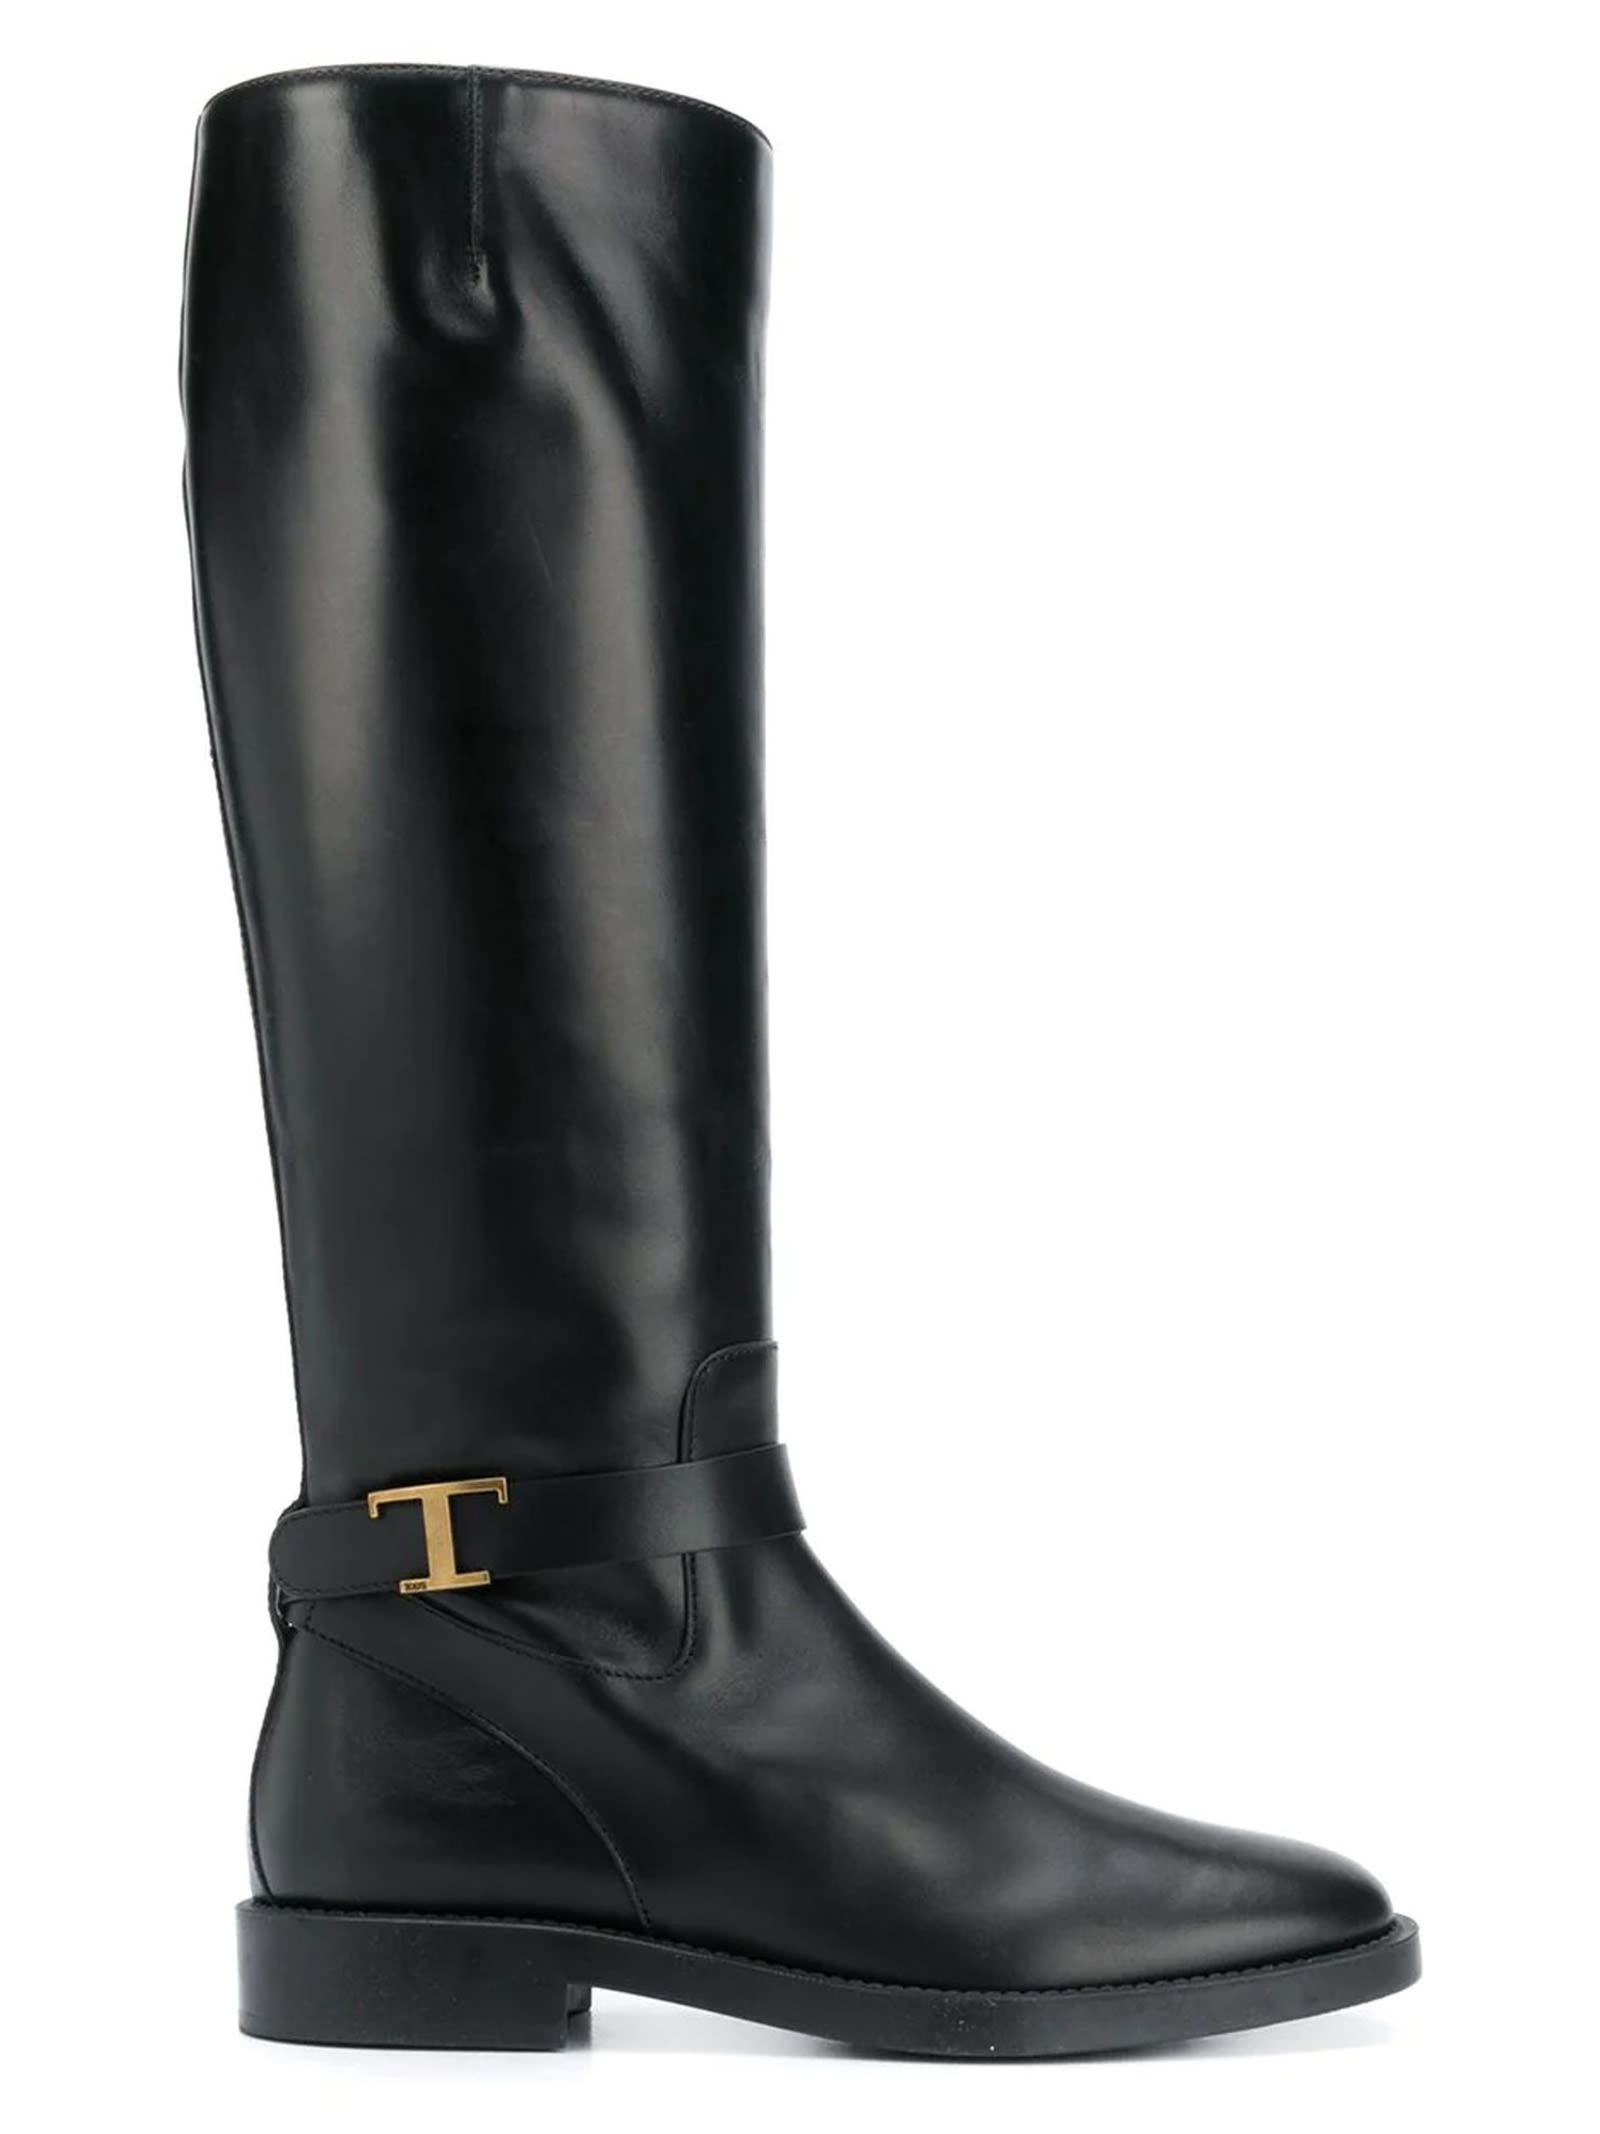 Tods Black Smooth Leather Boot